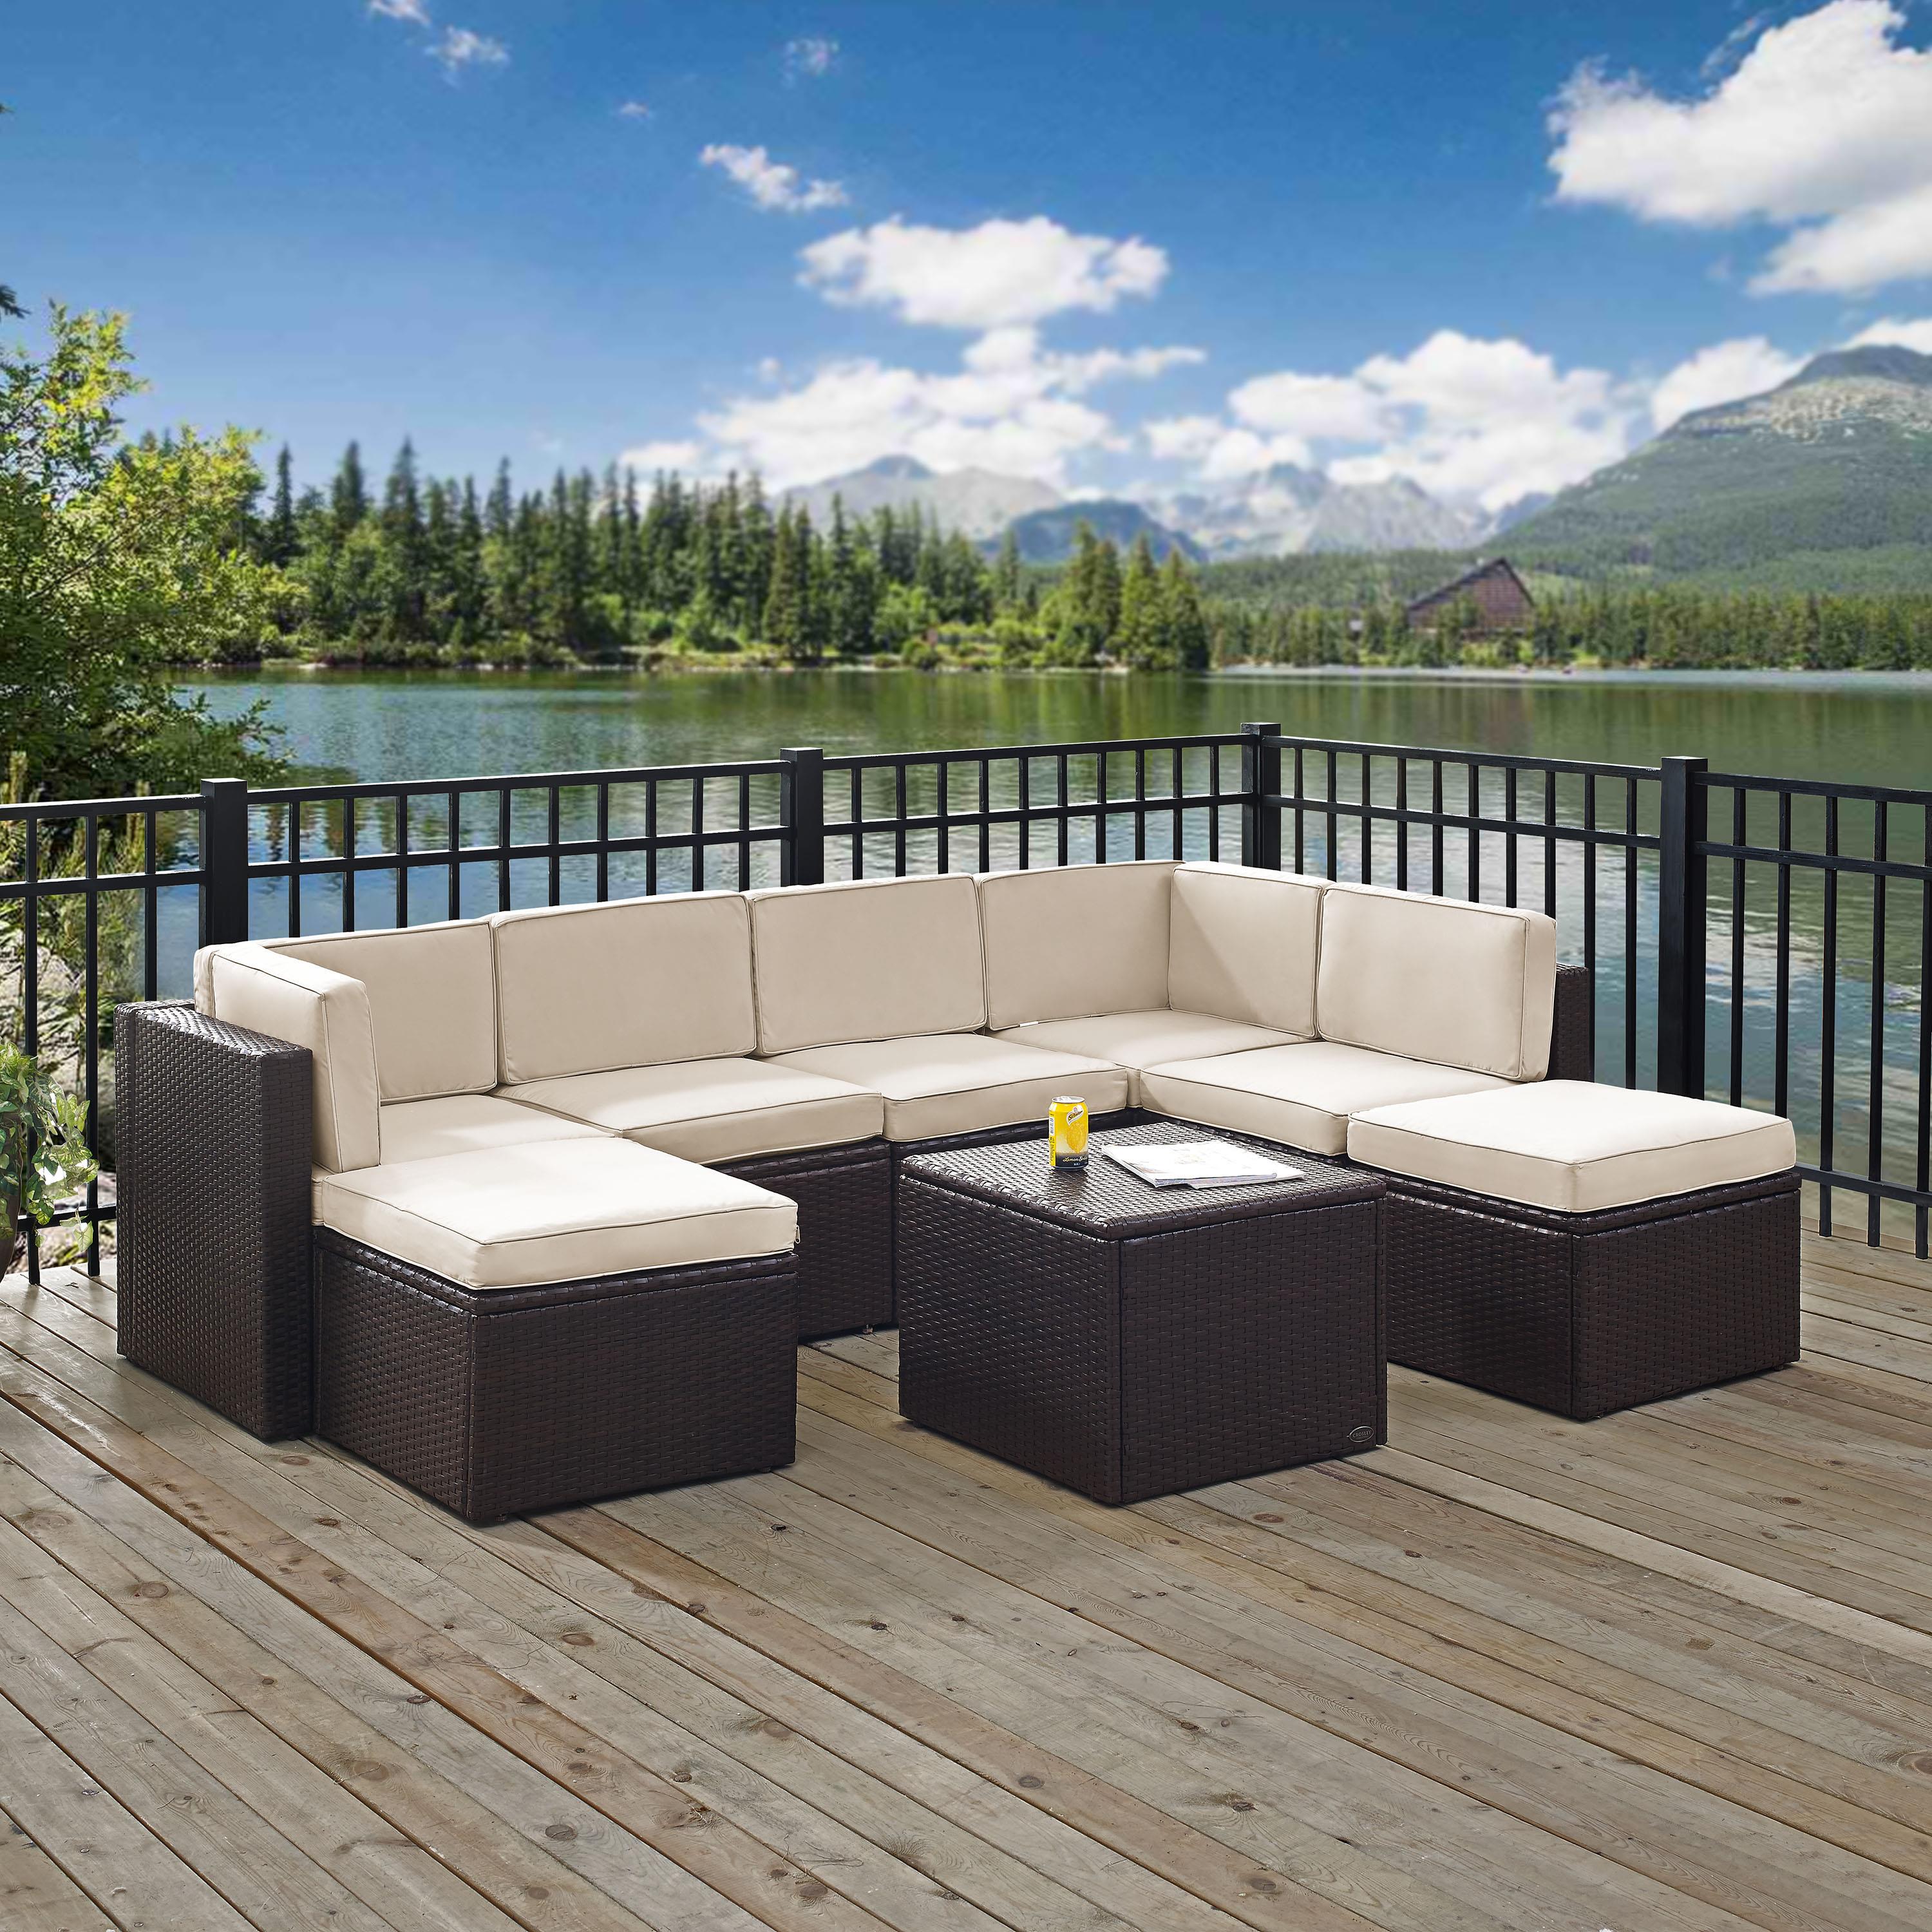 Crosley Palm Harbor 8 Piece Wicker Patio Sectional Set in Brown and Sand - image 5 of 6